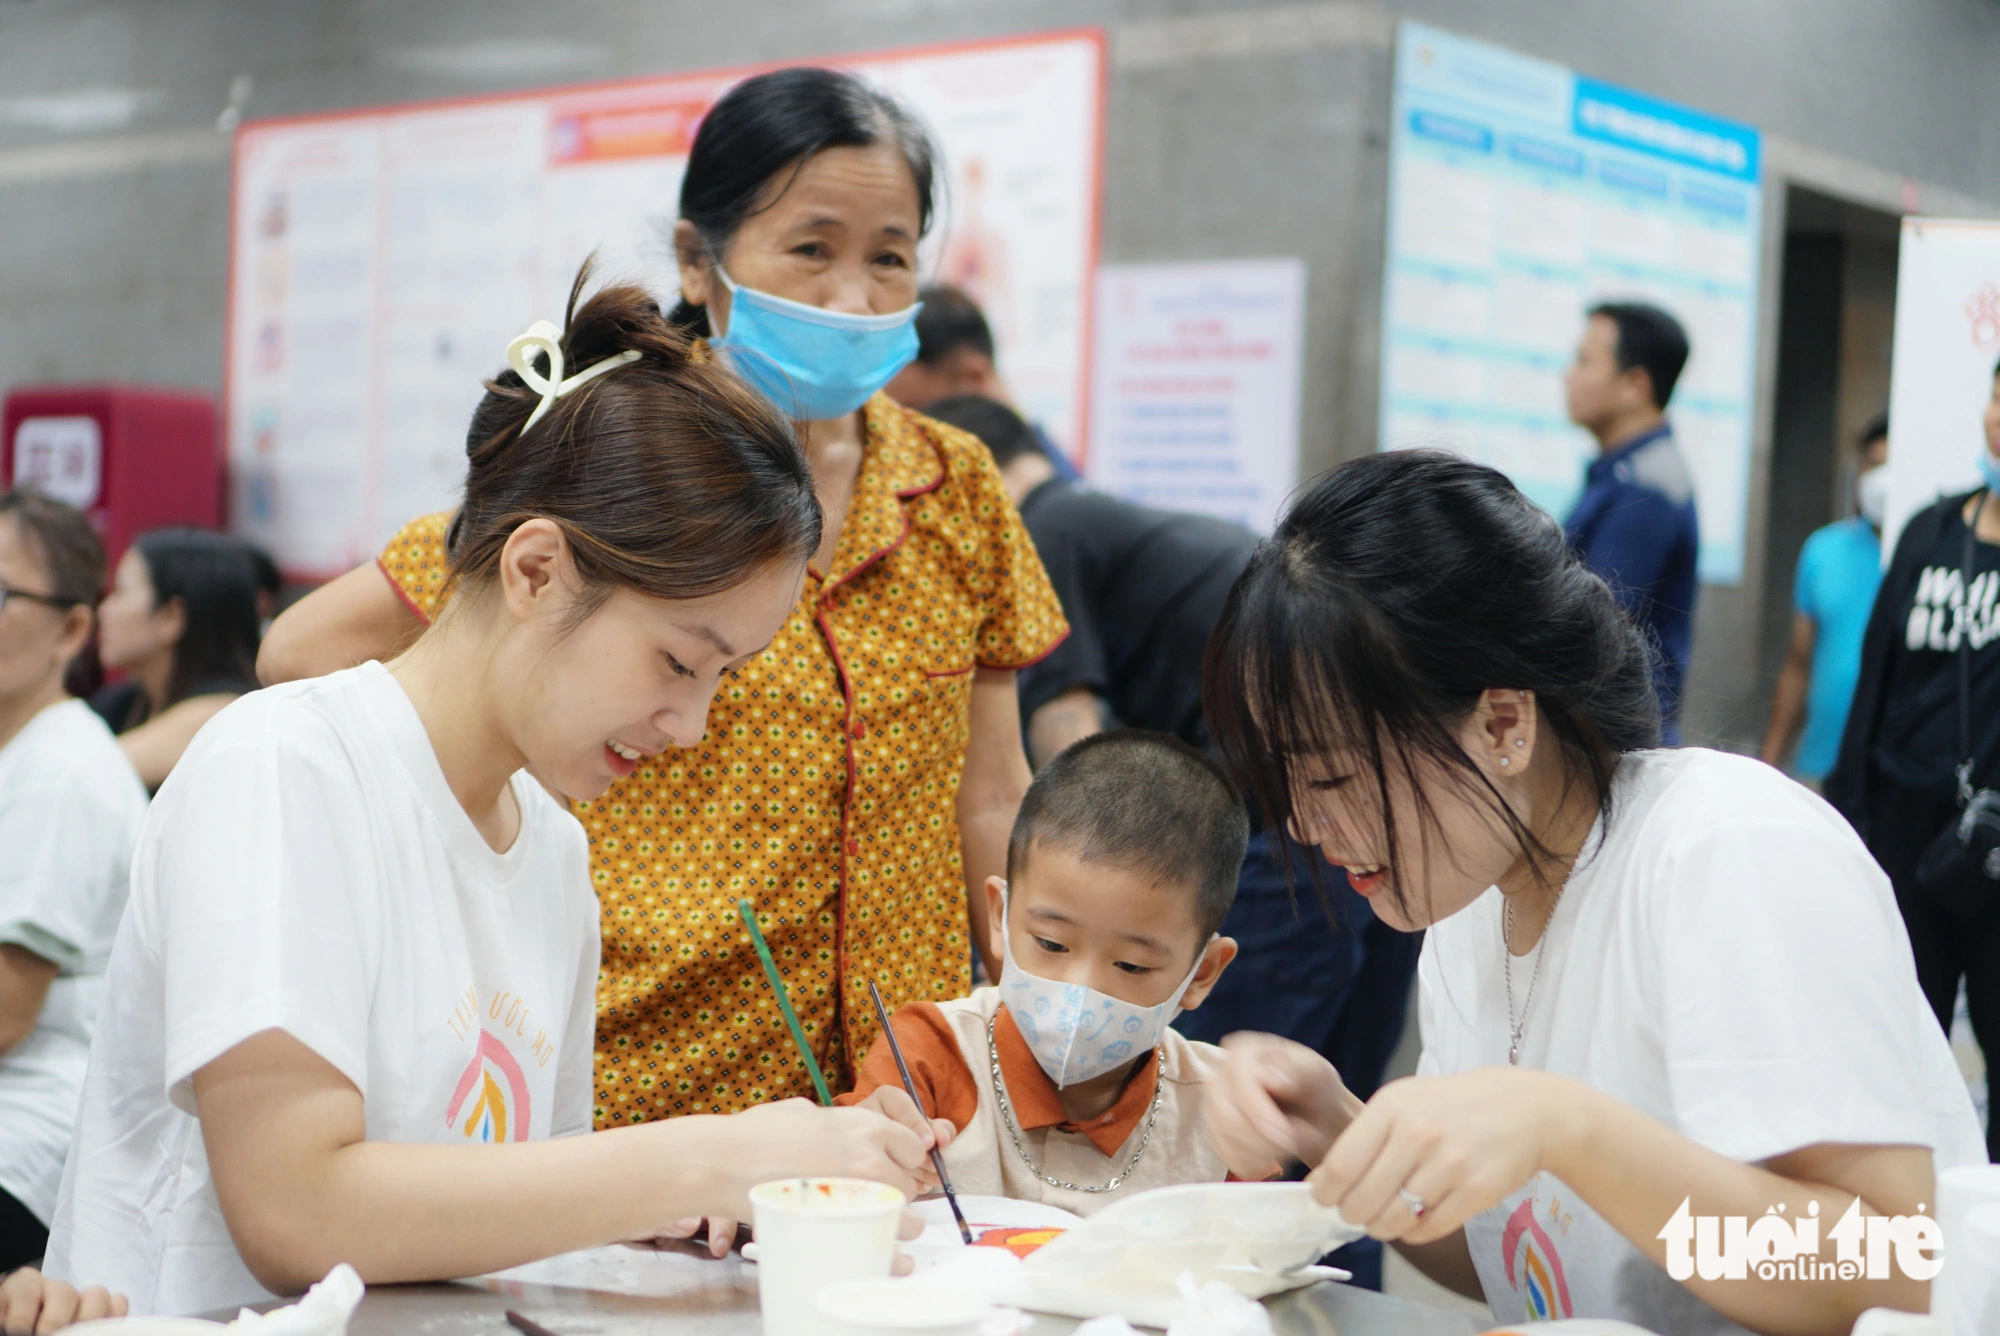 Child cancer patients also paint pictures and make bracelets and necklaces at the hair donation event. Photo: Nguyen Hien / Tuoi Tre